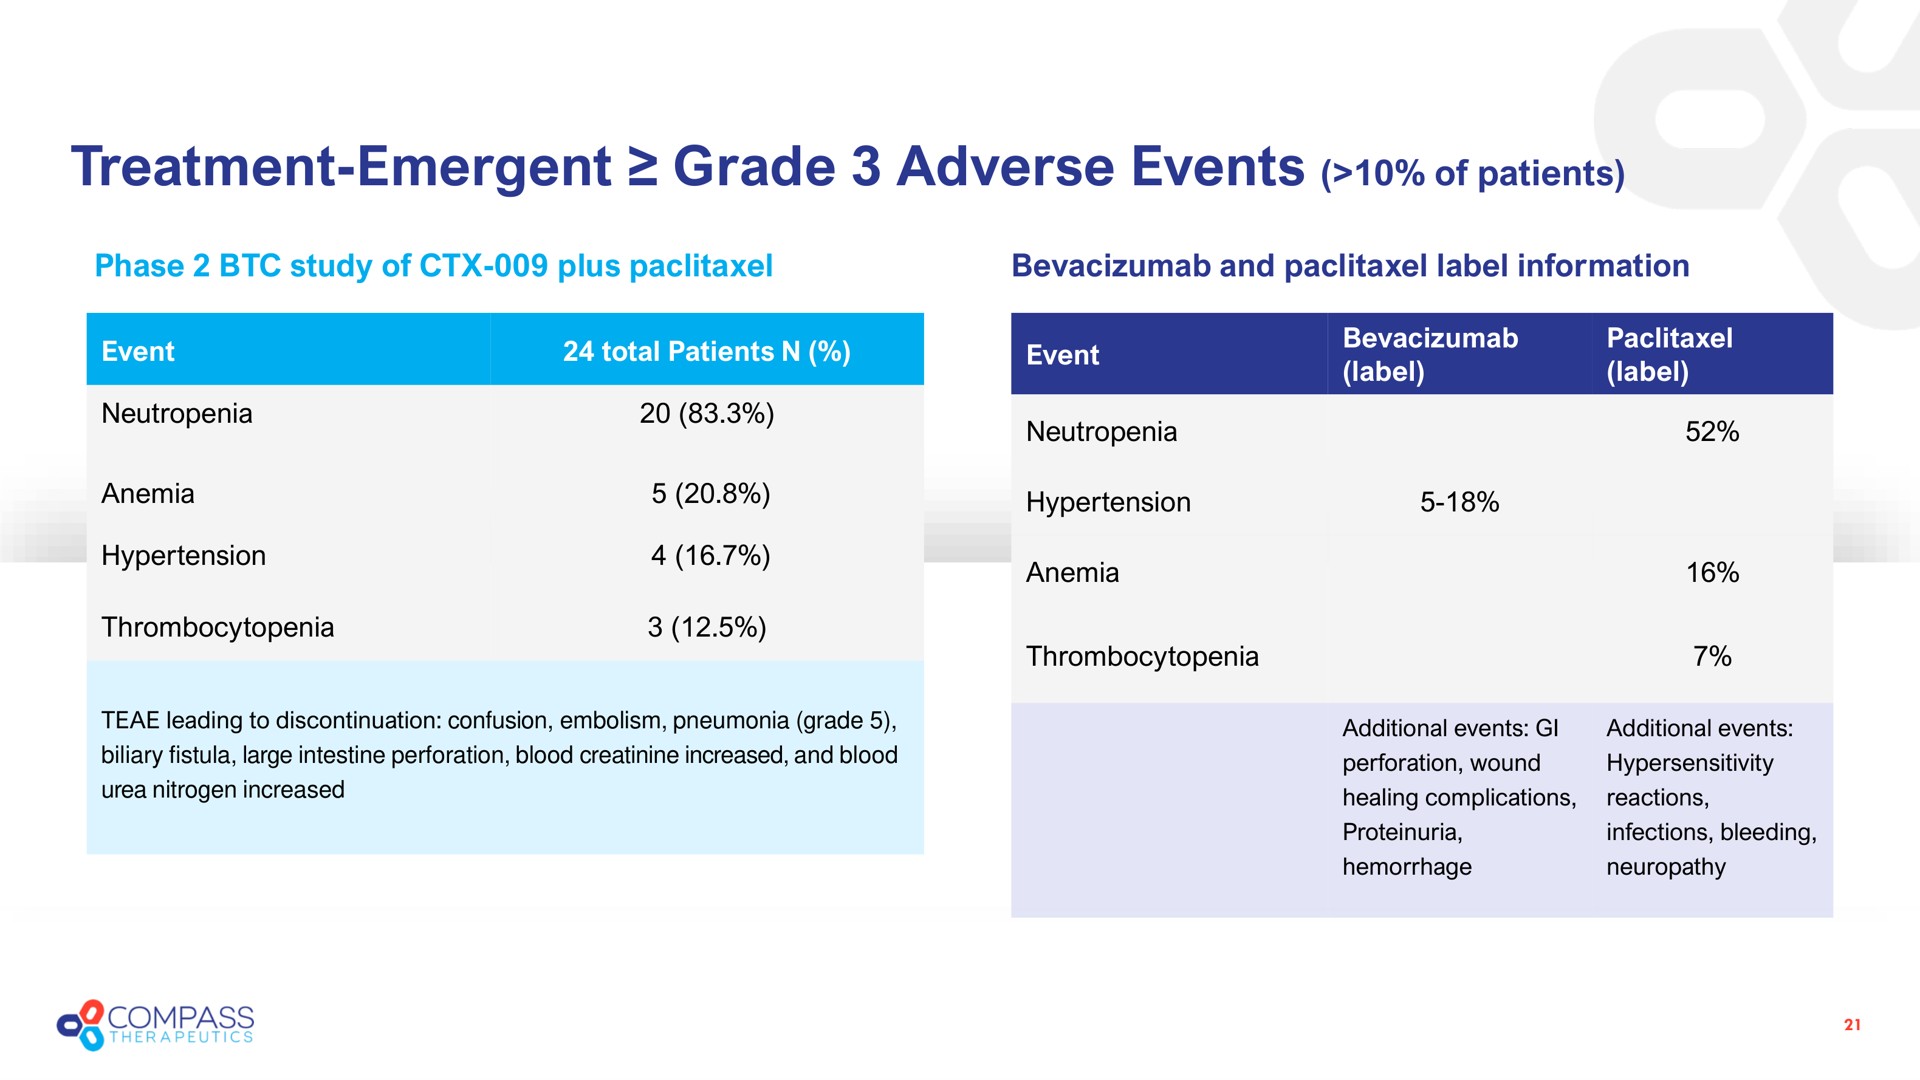 treatment emergent grade adverse events of patients | Compass Therapeutics